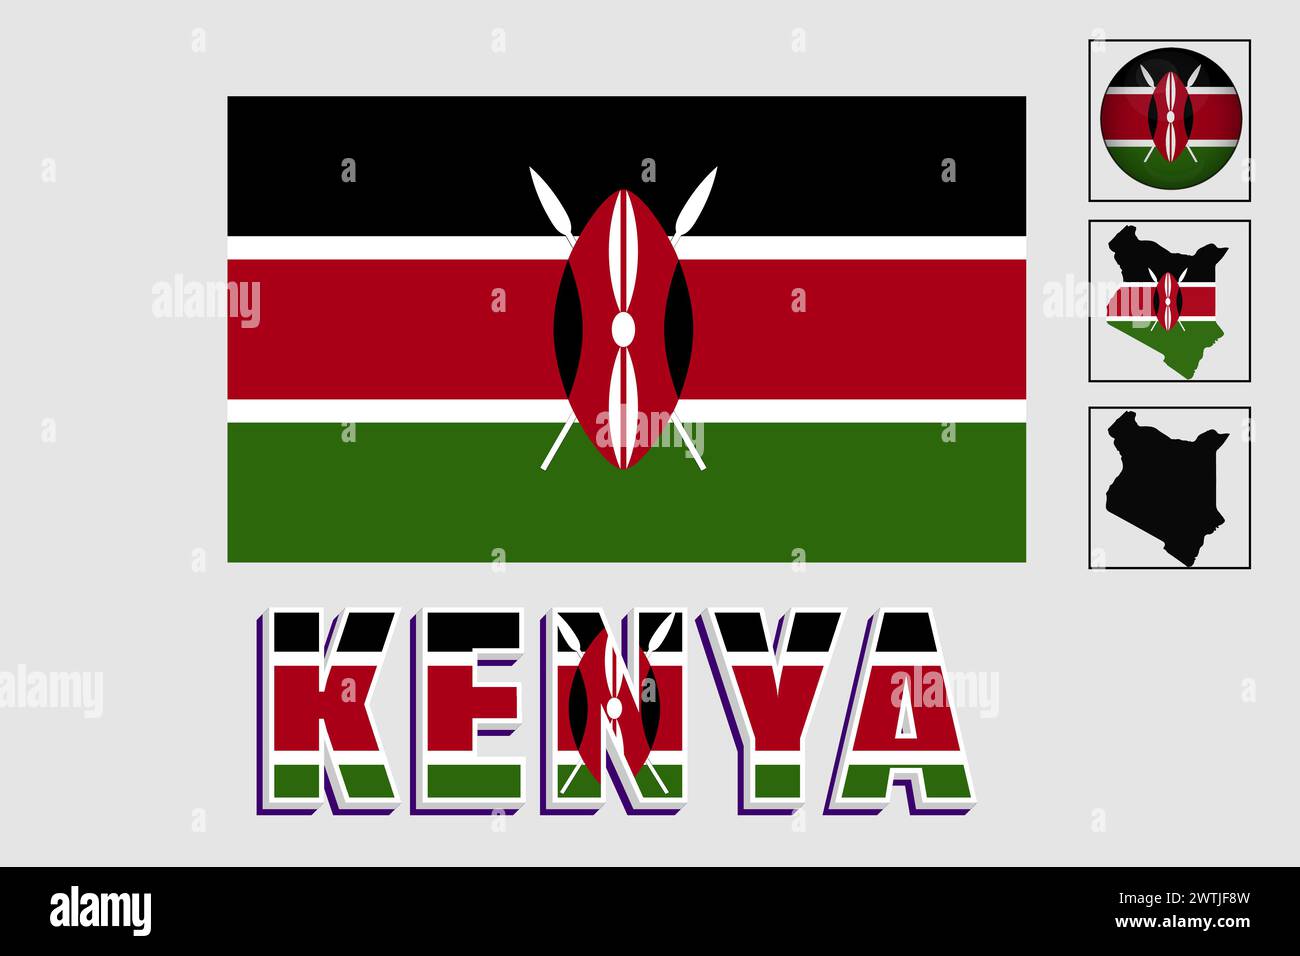 Kenya flag and map in a vector graphic Stock Vector